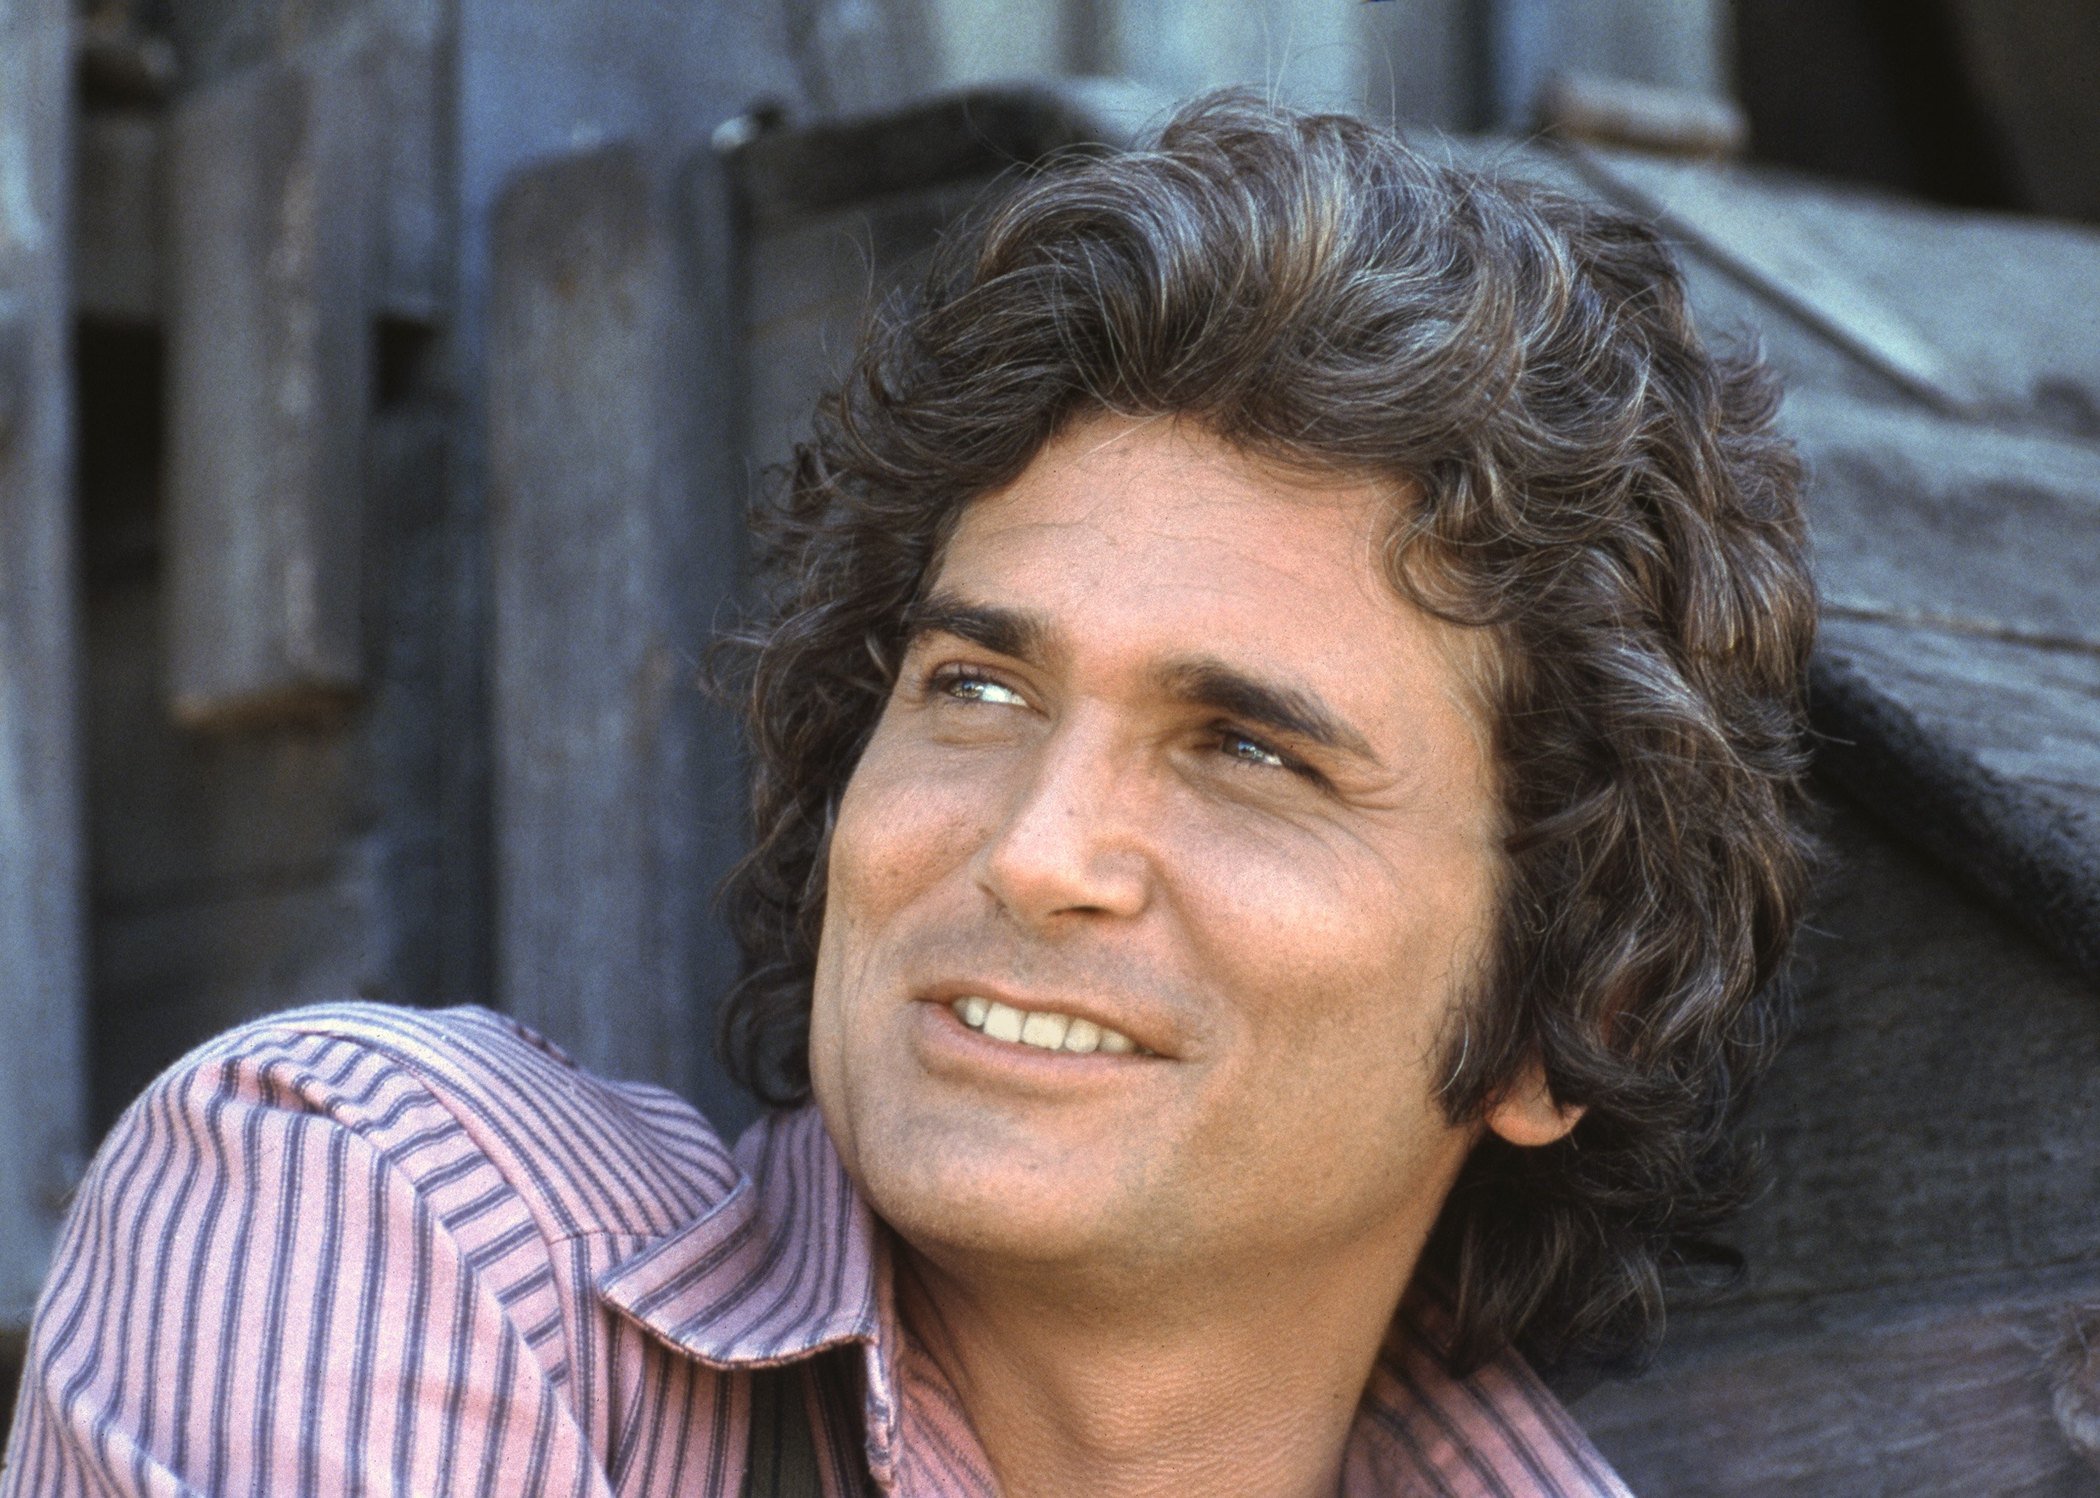 Michael Landon as Charles Philip Ingalls on 'Little House on the Prairie'